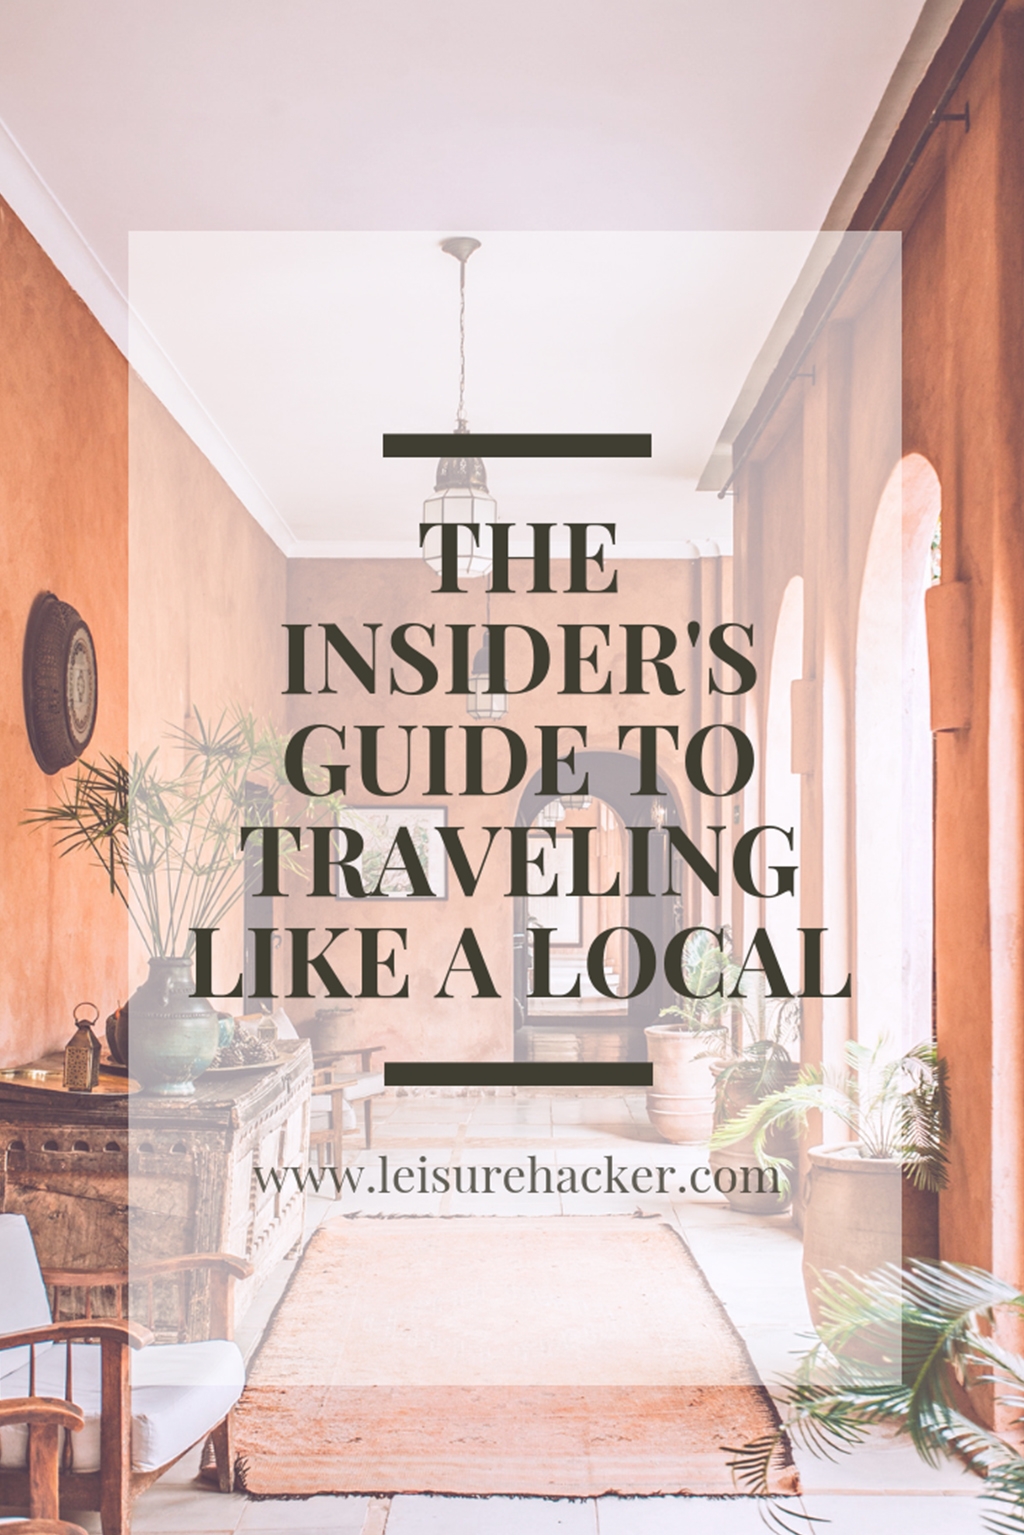 The insider's guide to traveling like a local